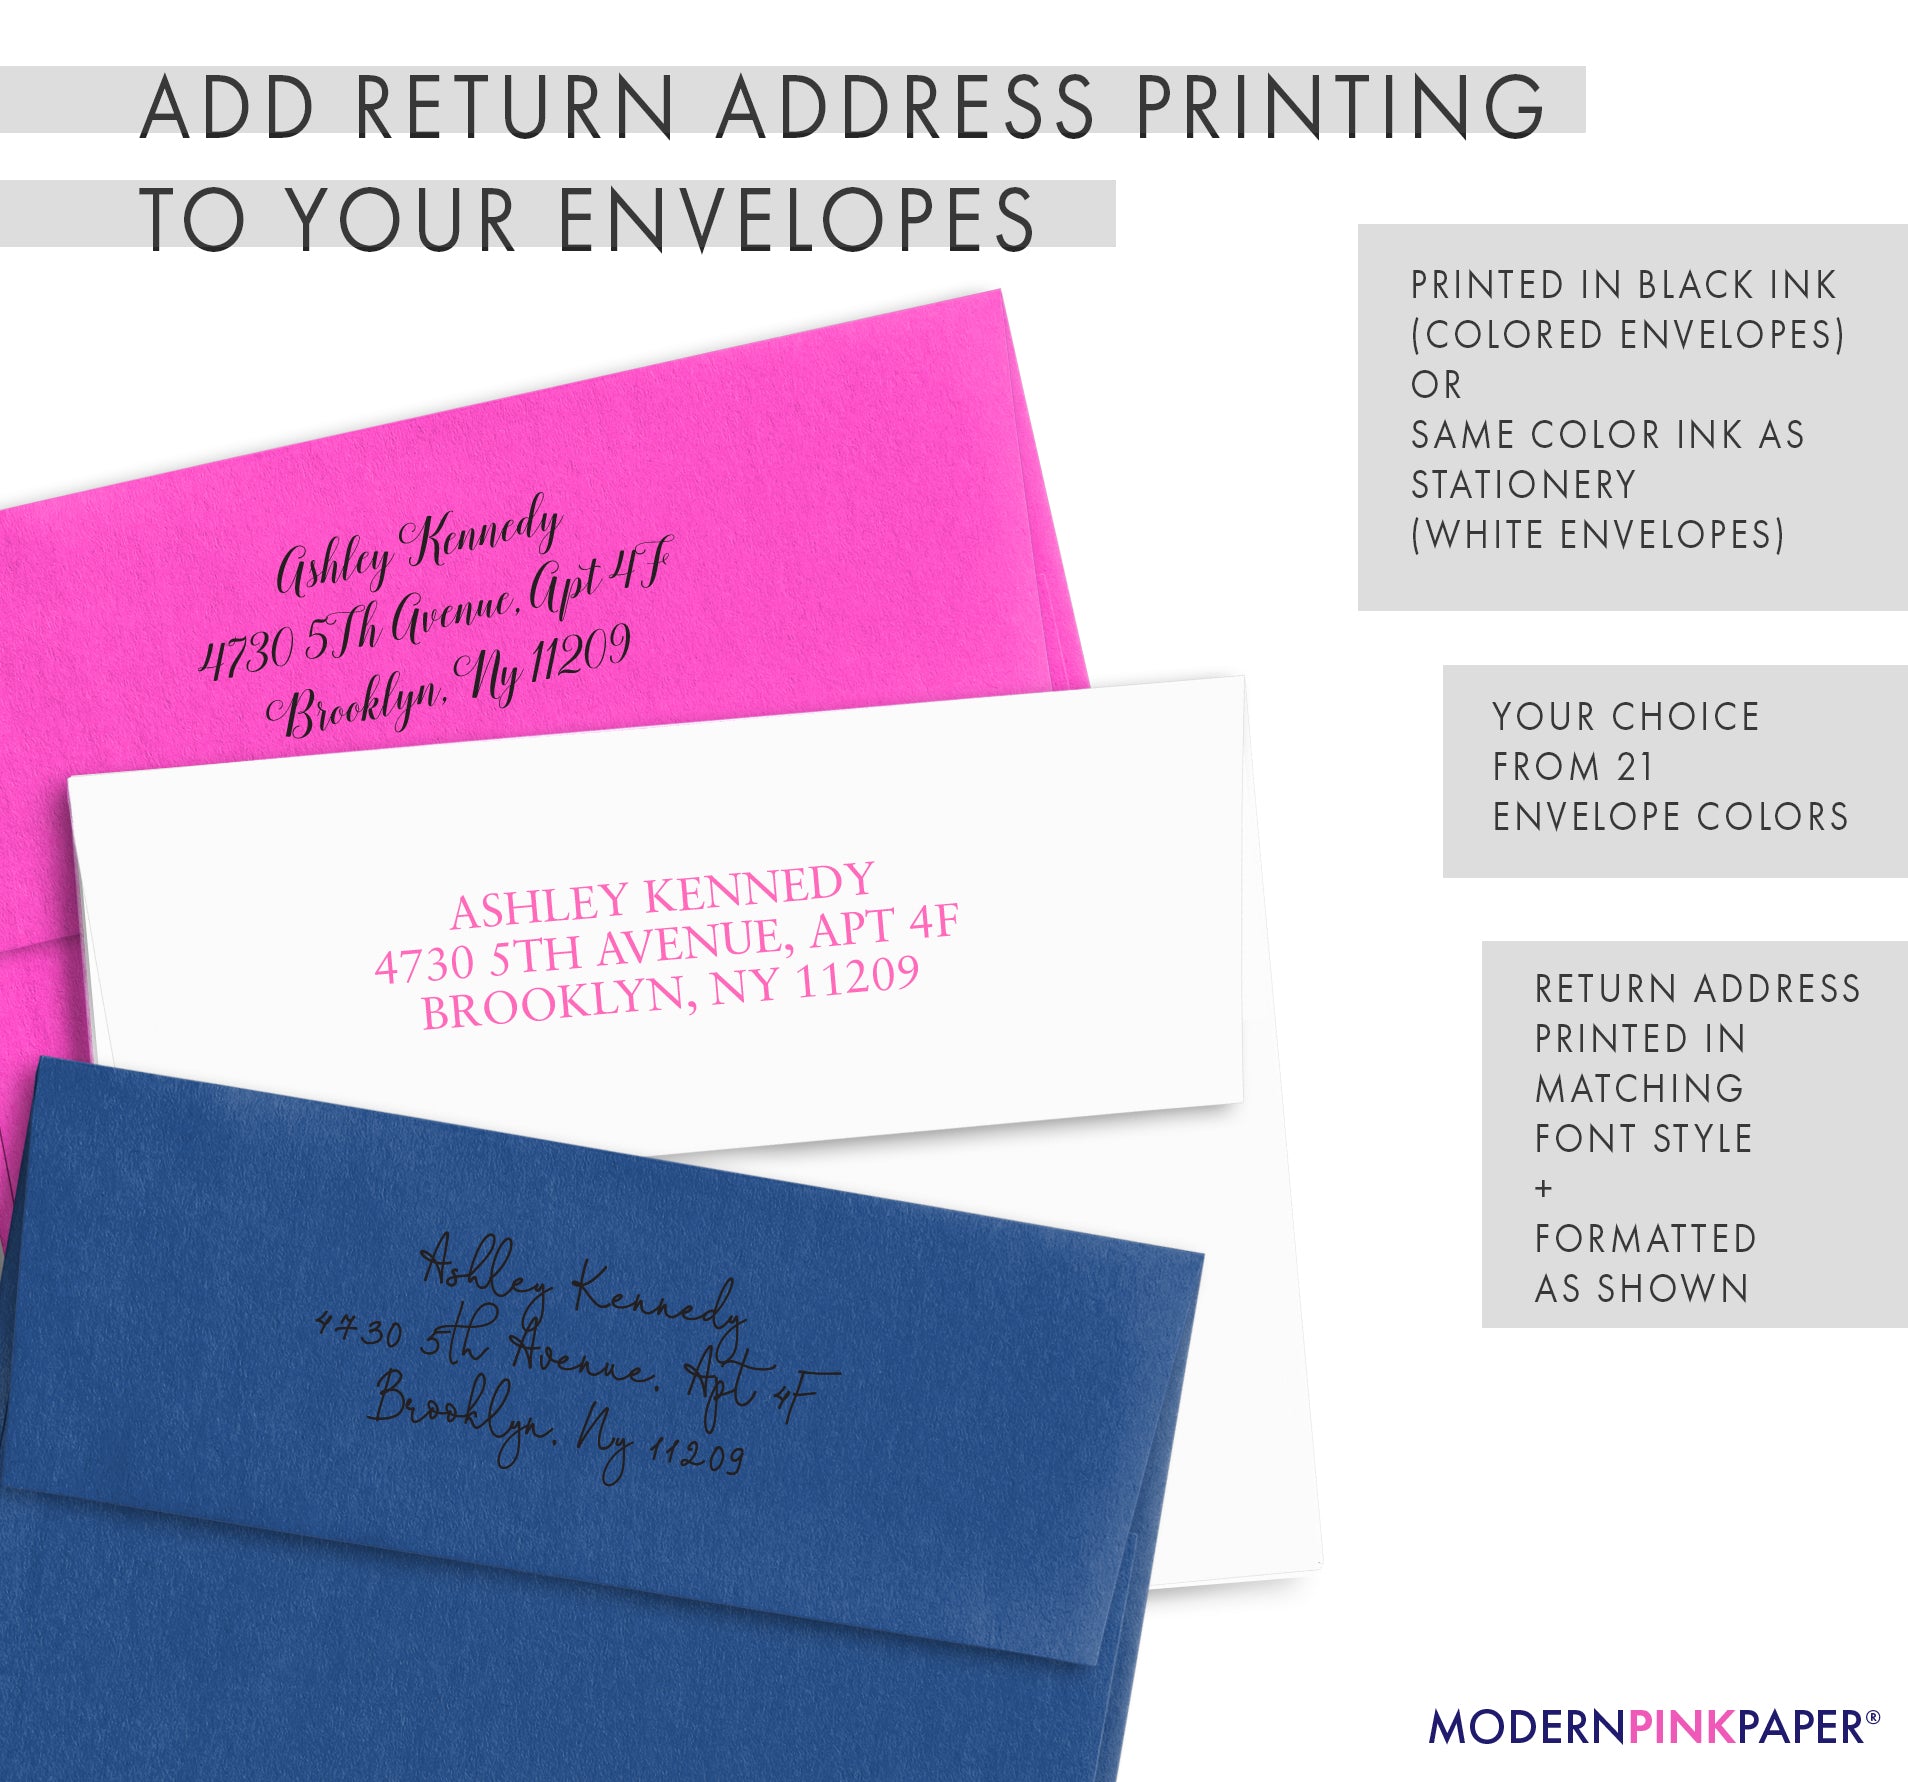 Add return address printing to your envelopes add on service